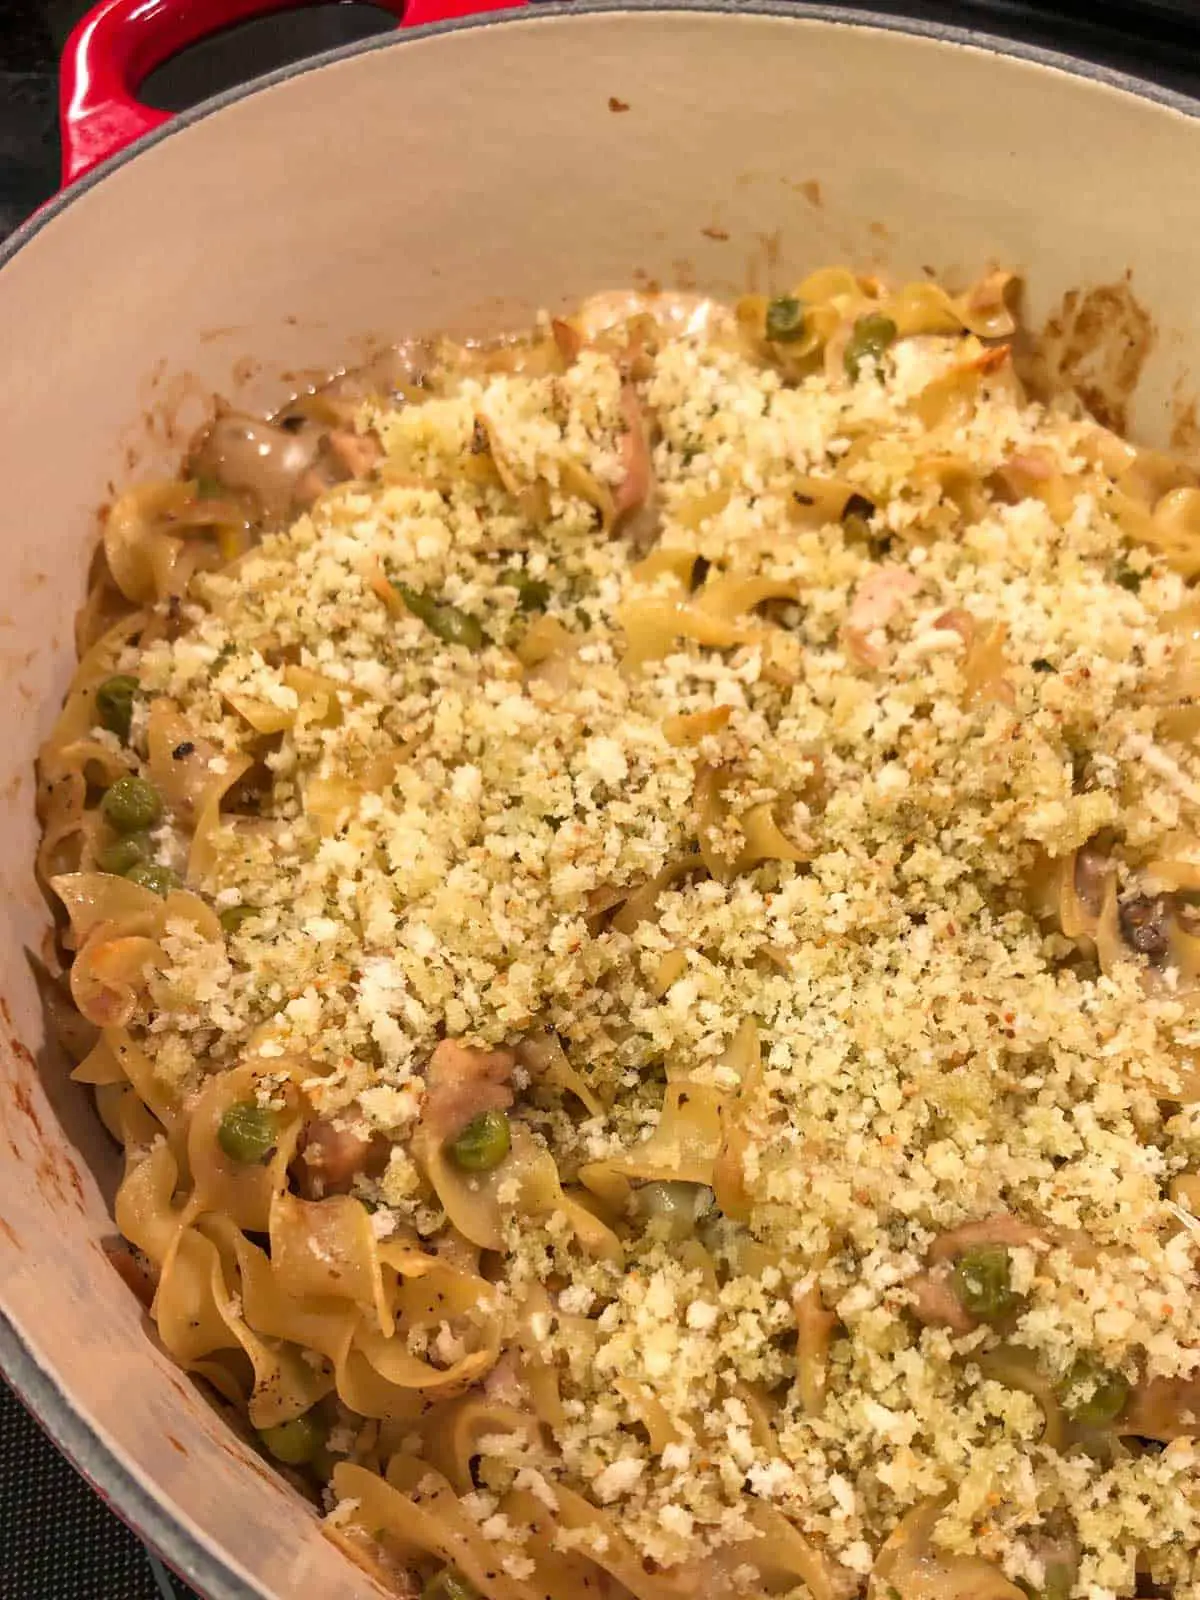 Noodles cooked with tuna and peas in a creamy sauce with a panko topping in a red handled Dutch oven.